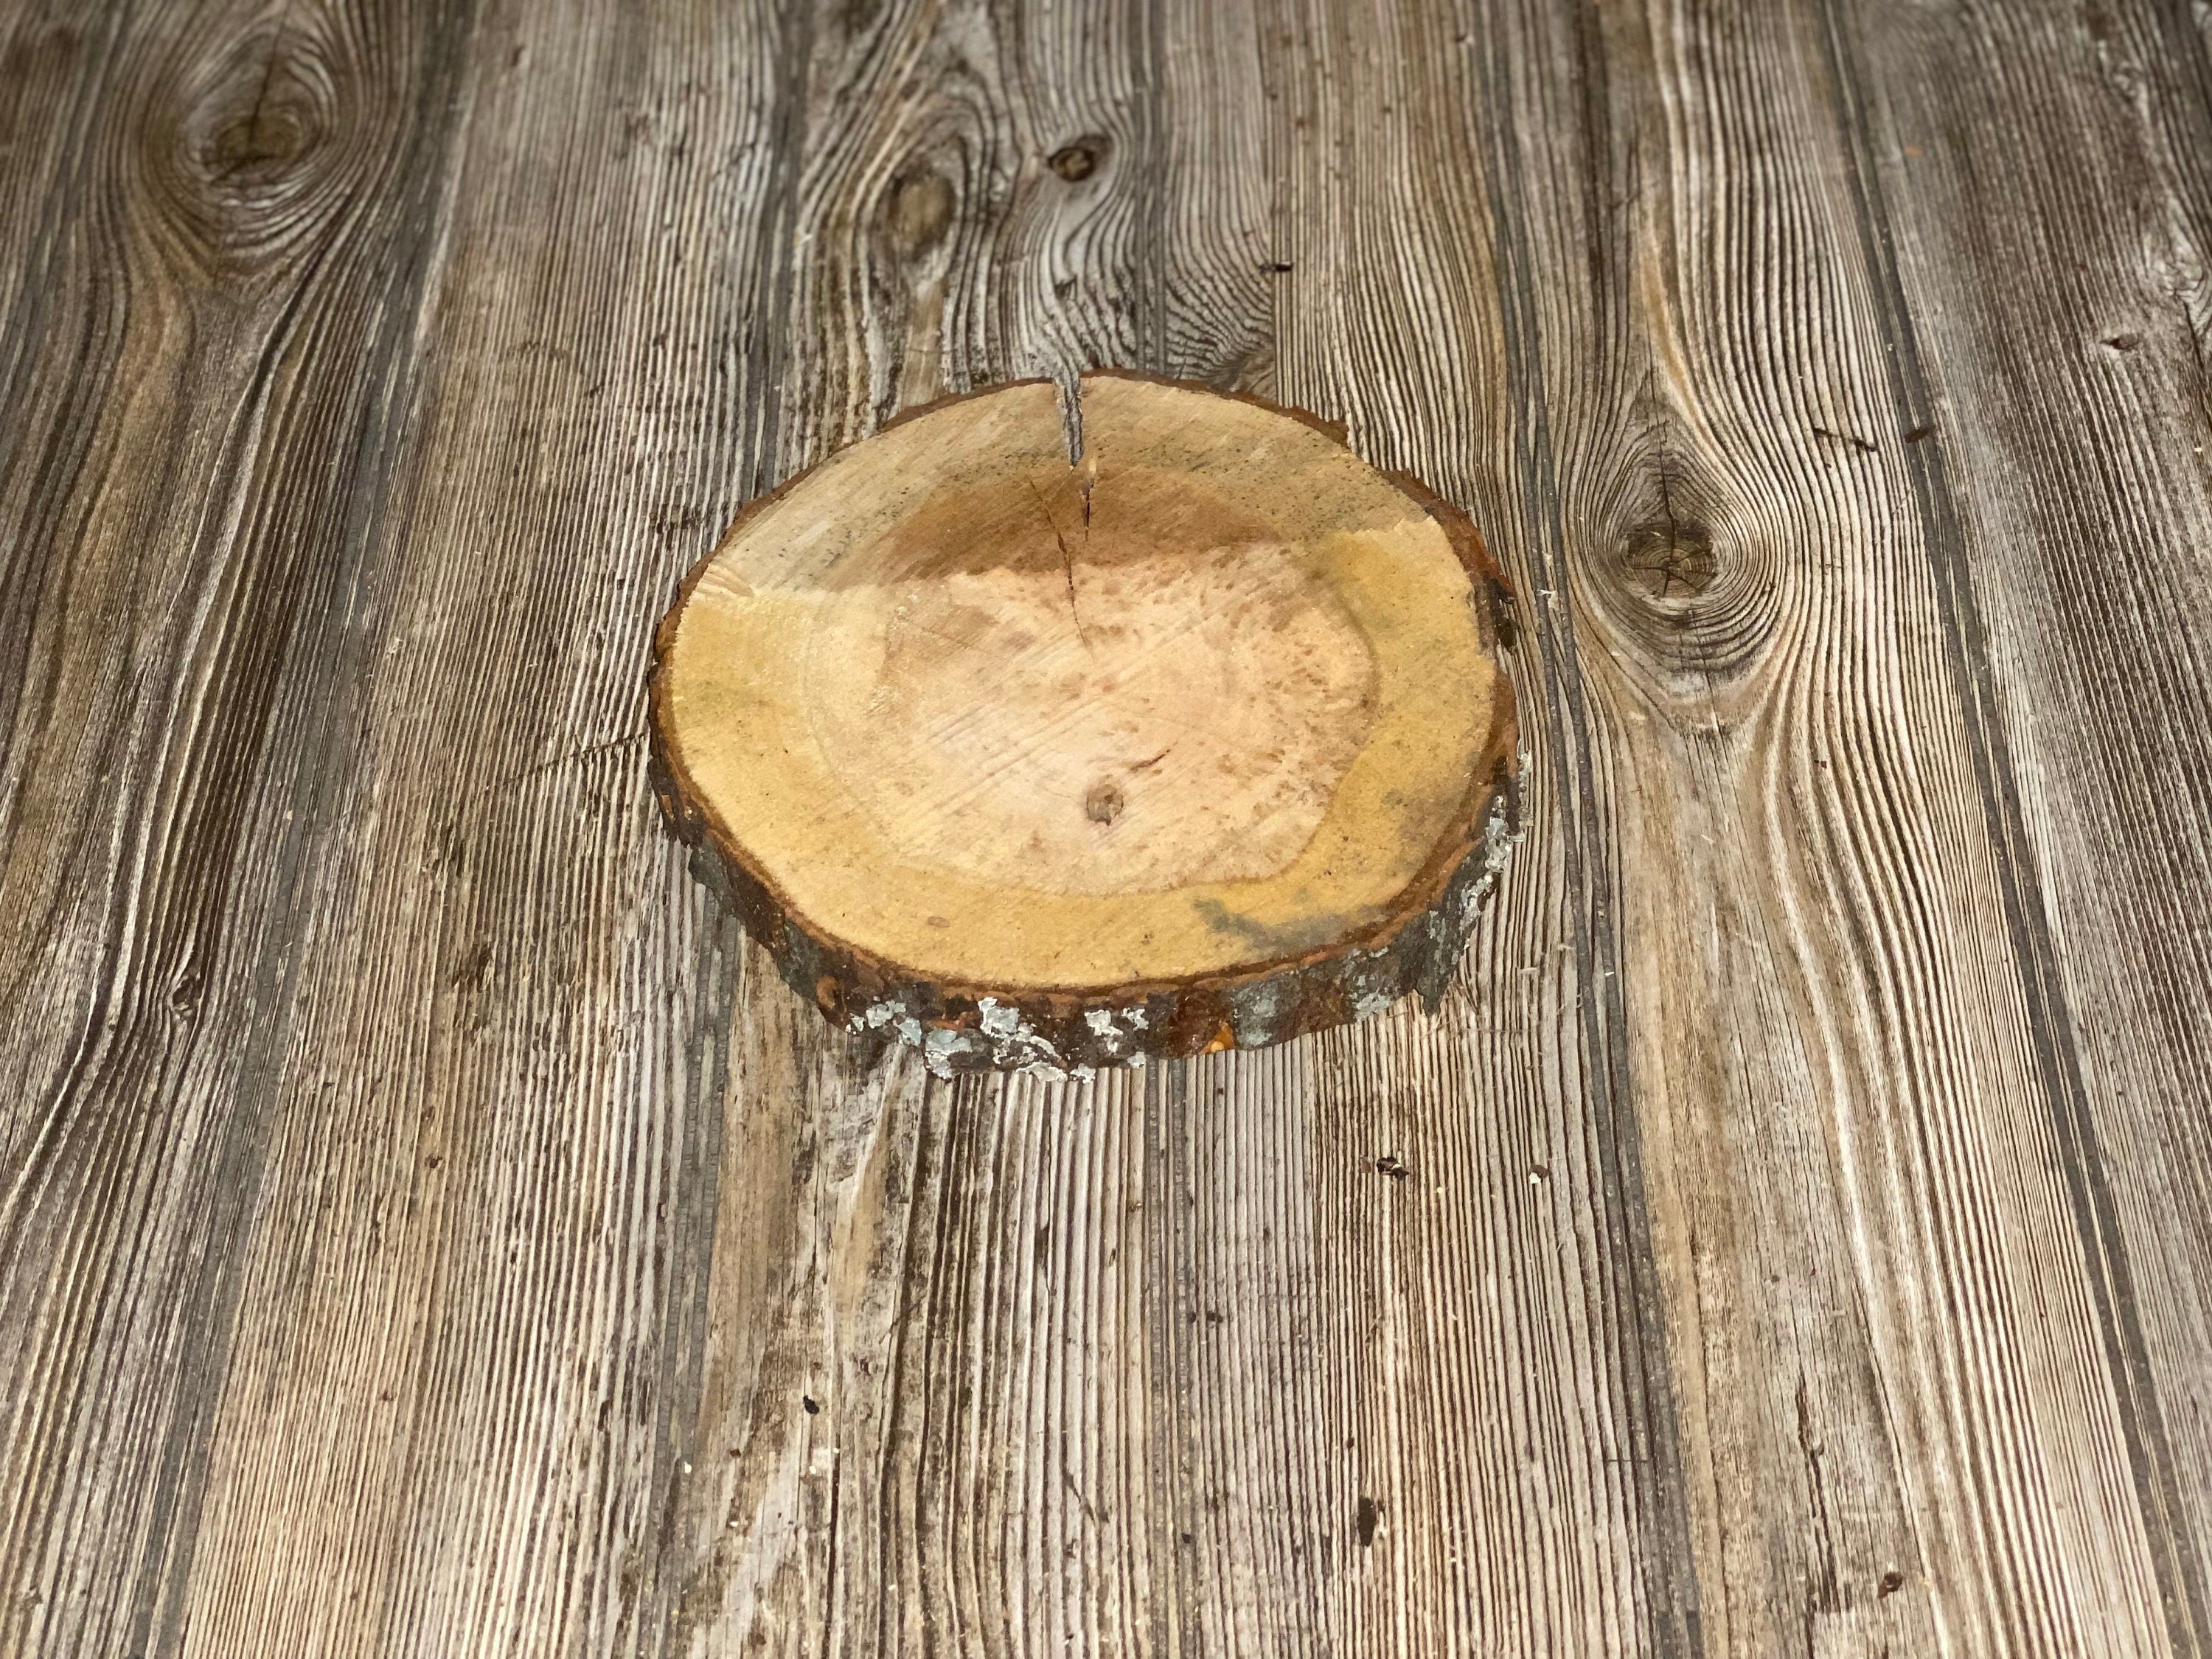 One Cracked Cherry Burl Slice, Approximately 8.5 Inches Long by 8 Inches Wide and 3/4 Inch Thick